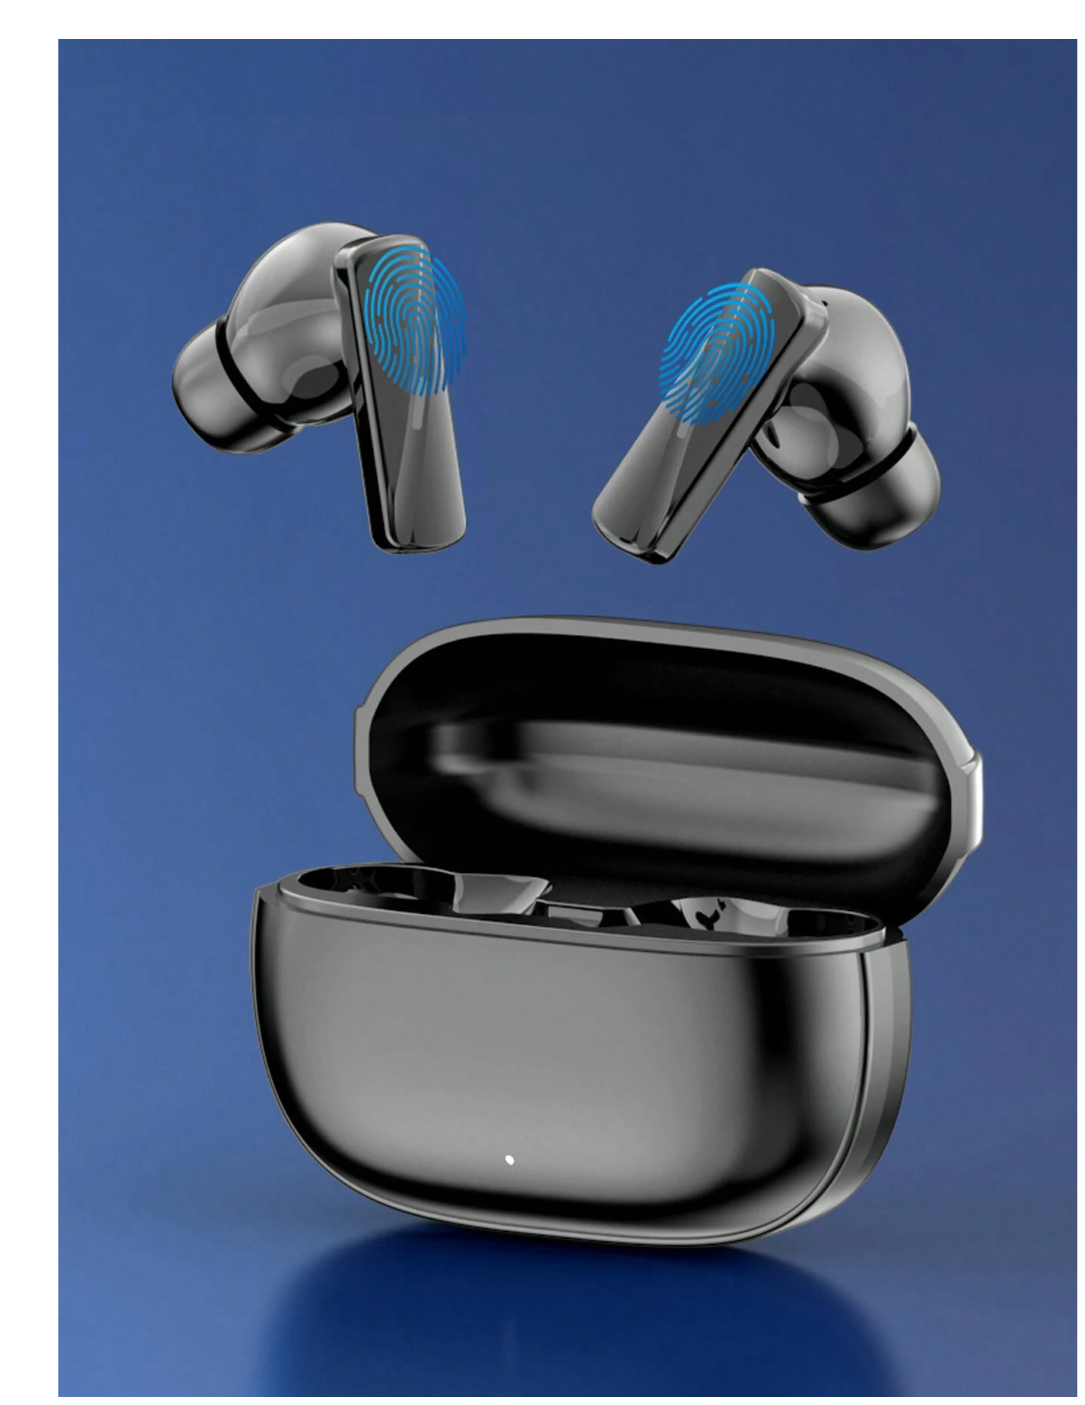 Immerse Yourself in Luxury: High-End Wireless Headphones with Digital Power Display & Emergency Power Bank – Noise Canceling, IPX7 Waterproof, the Ultimate Gift for Birthdays, Valentines, Boyfriends & Girlfriends!